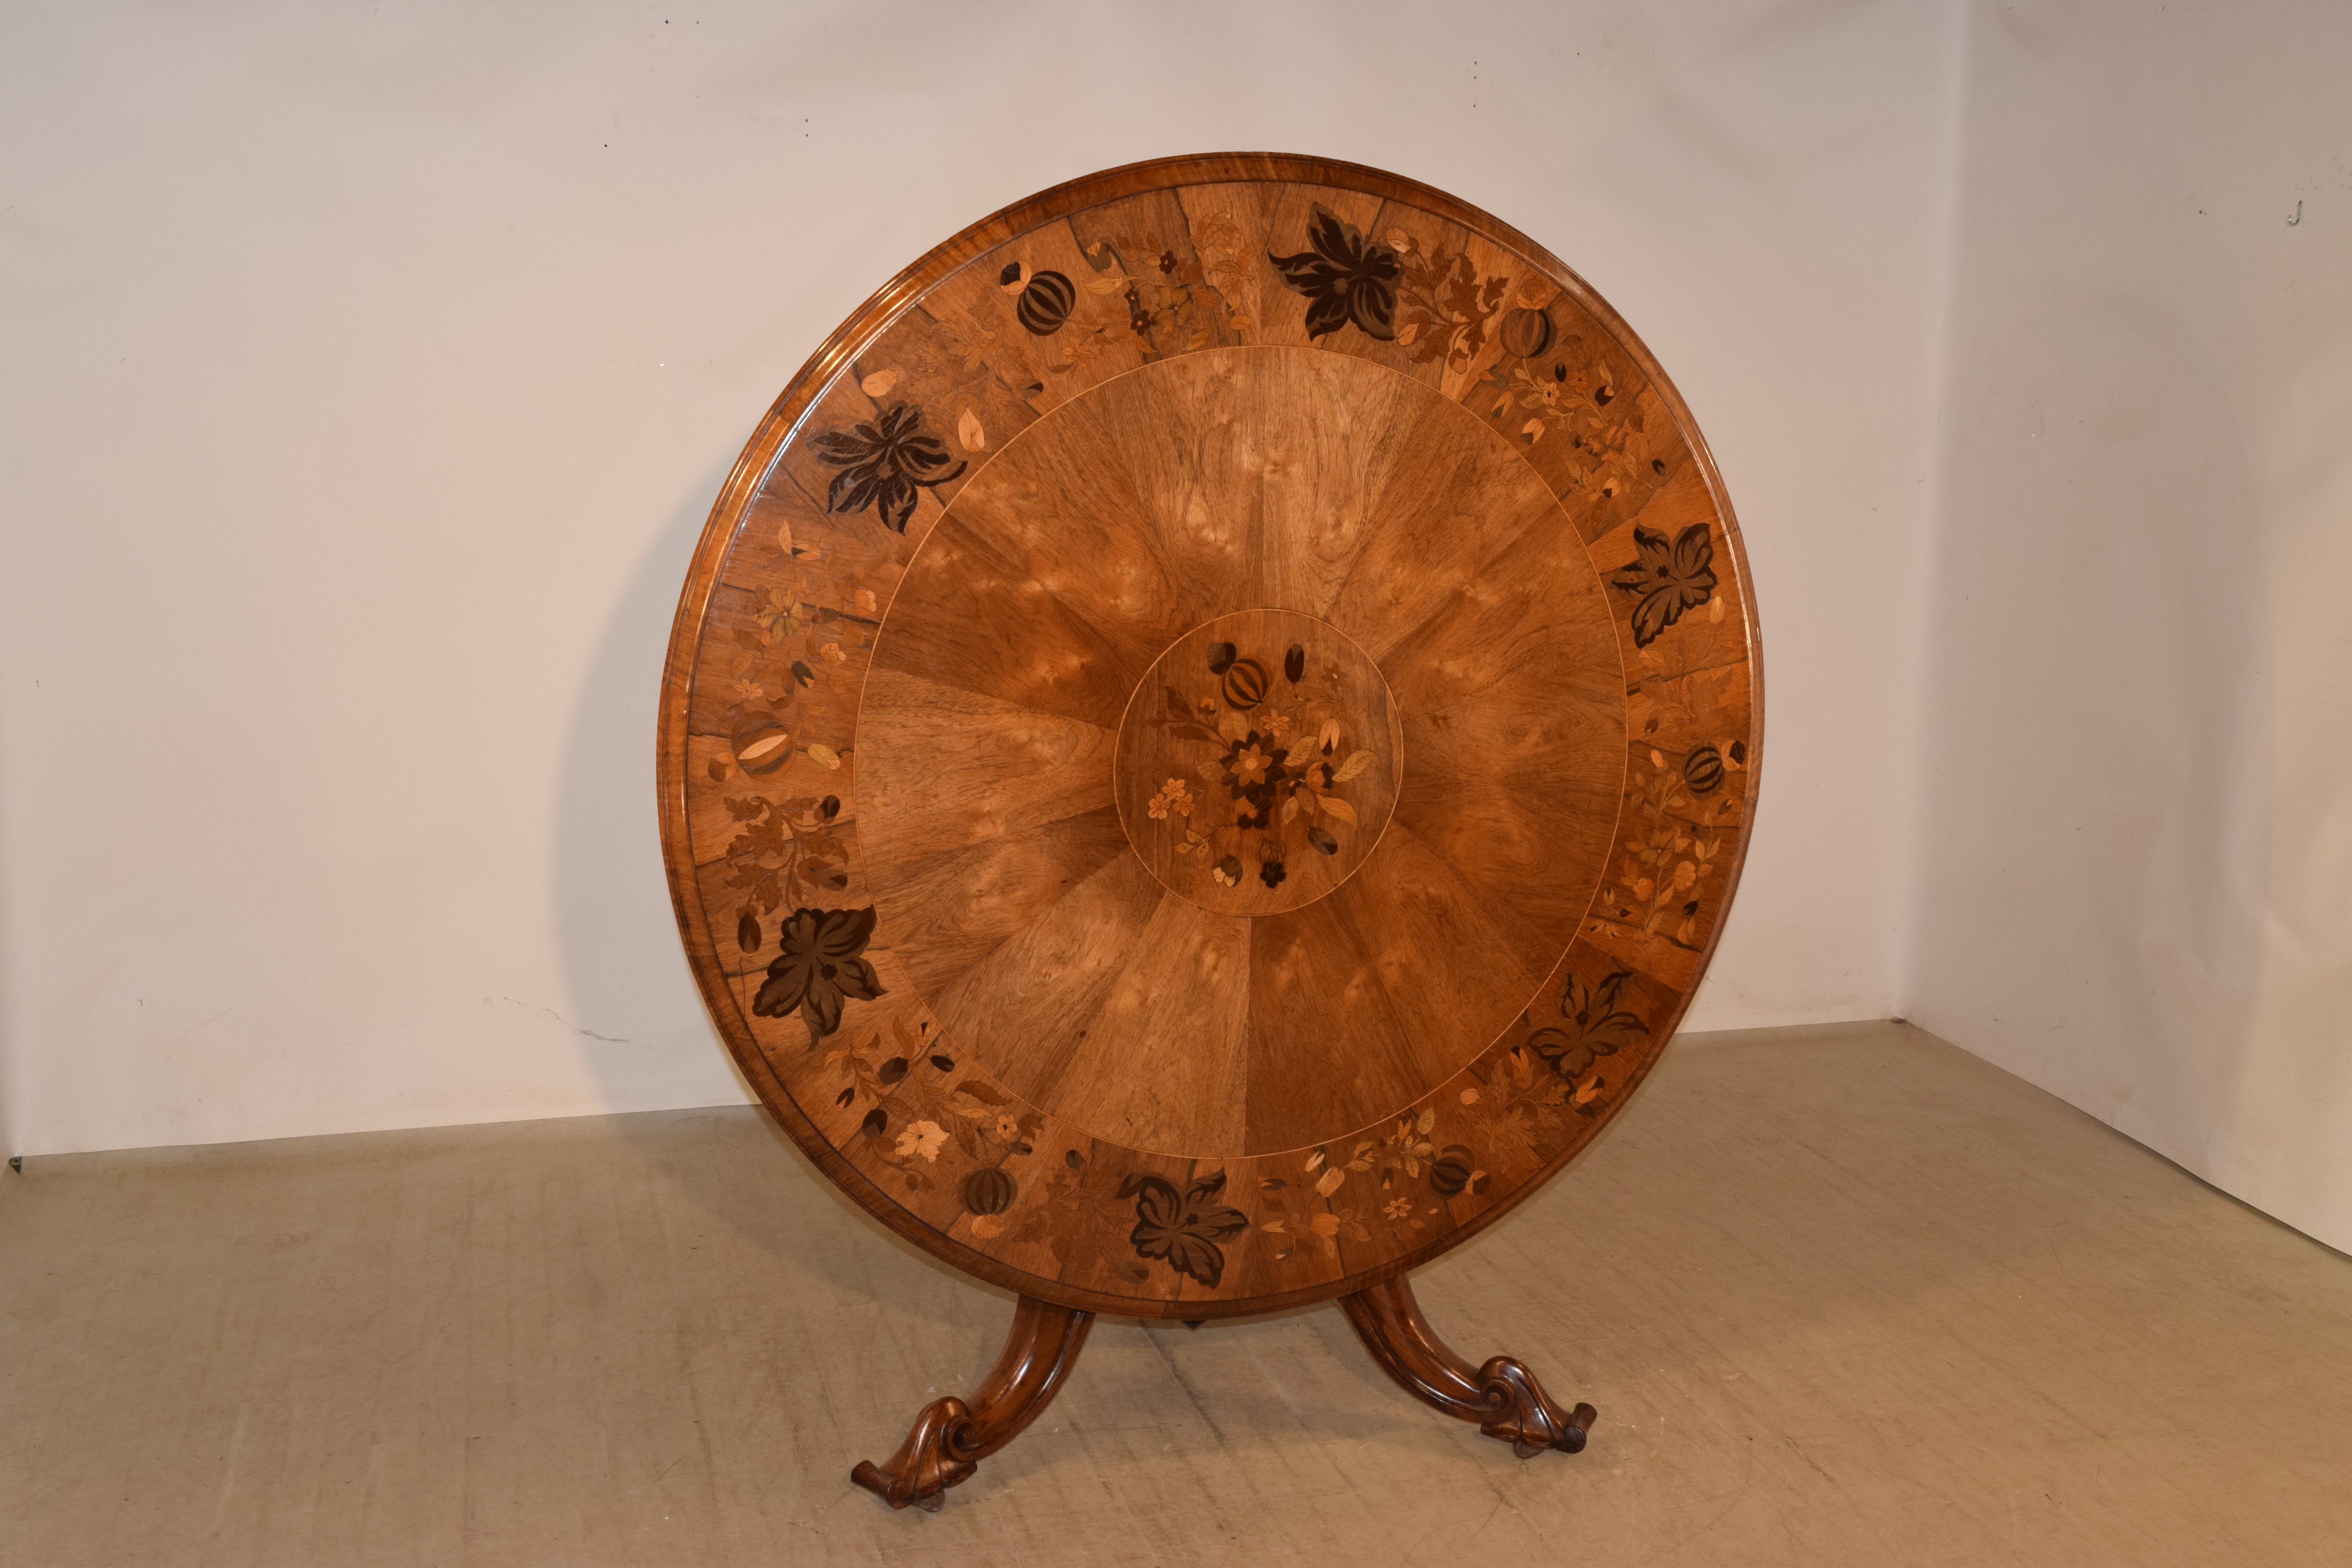 19th century tilt-top table from England made from mahogany and rosewood. The top has a beveled edge around a band of rosewood with inlaid patterns of florals, vines and fruits. The inlay work is absolutely exquisite. The rosewood band has an inner